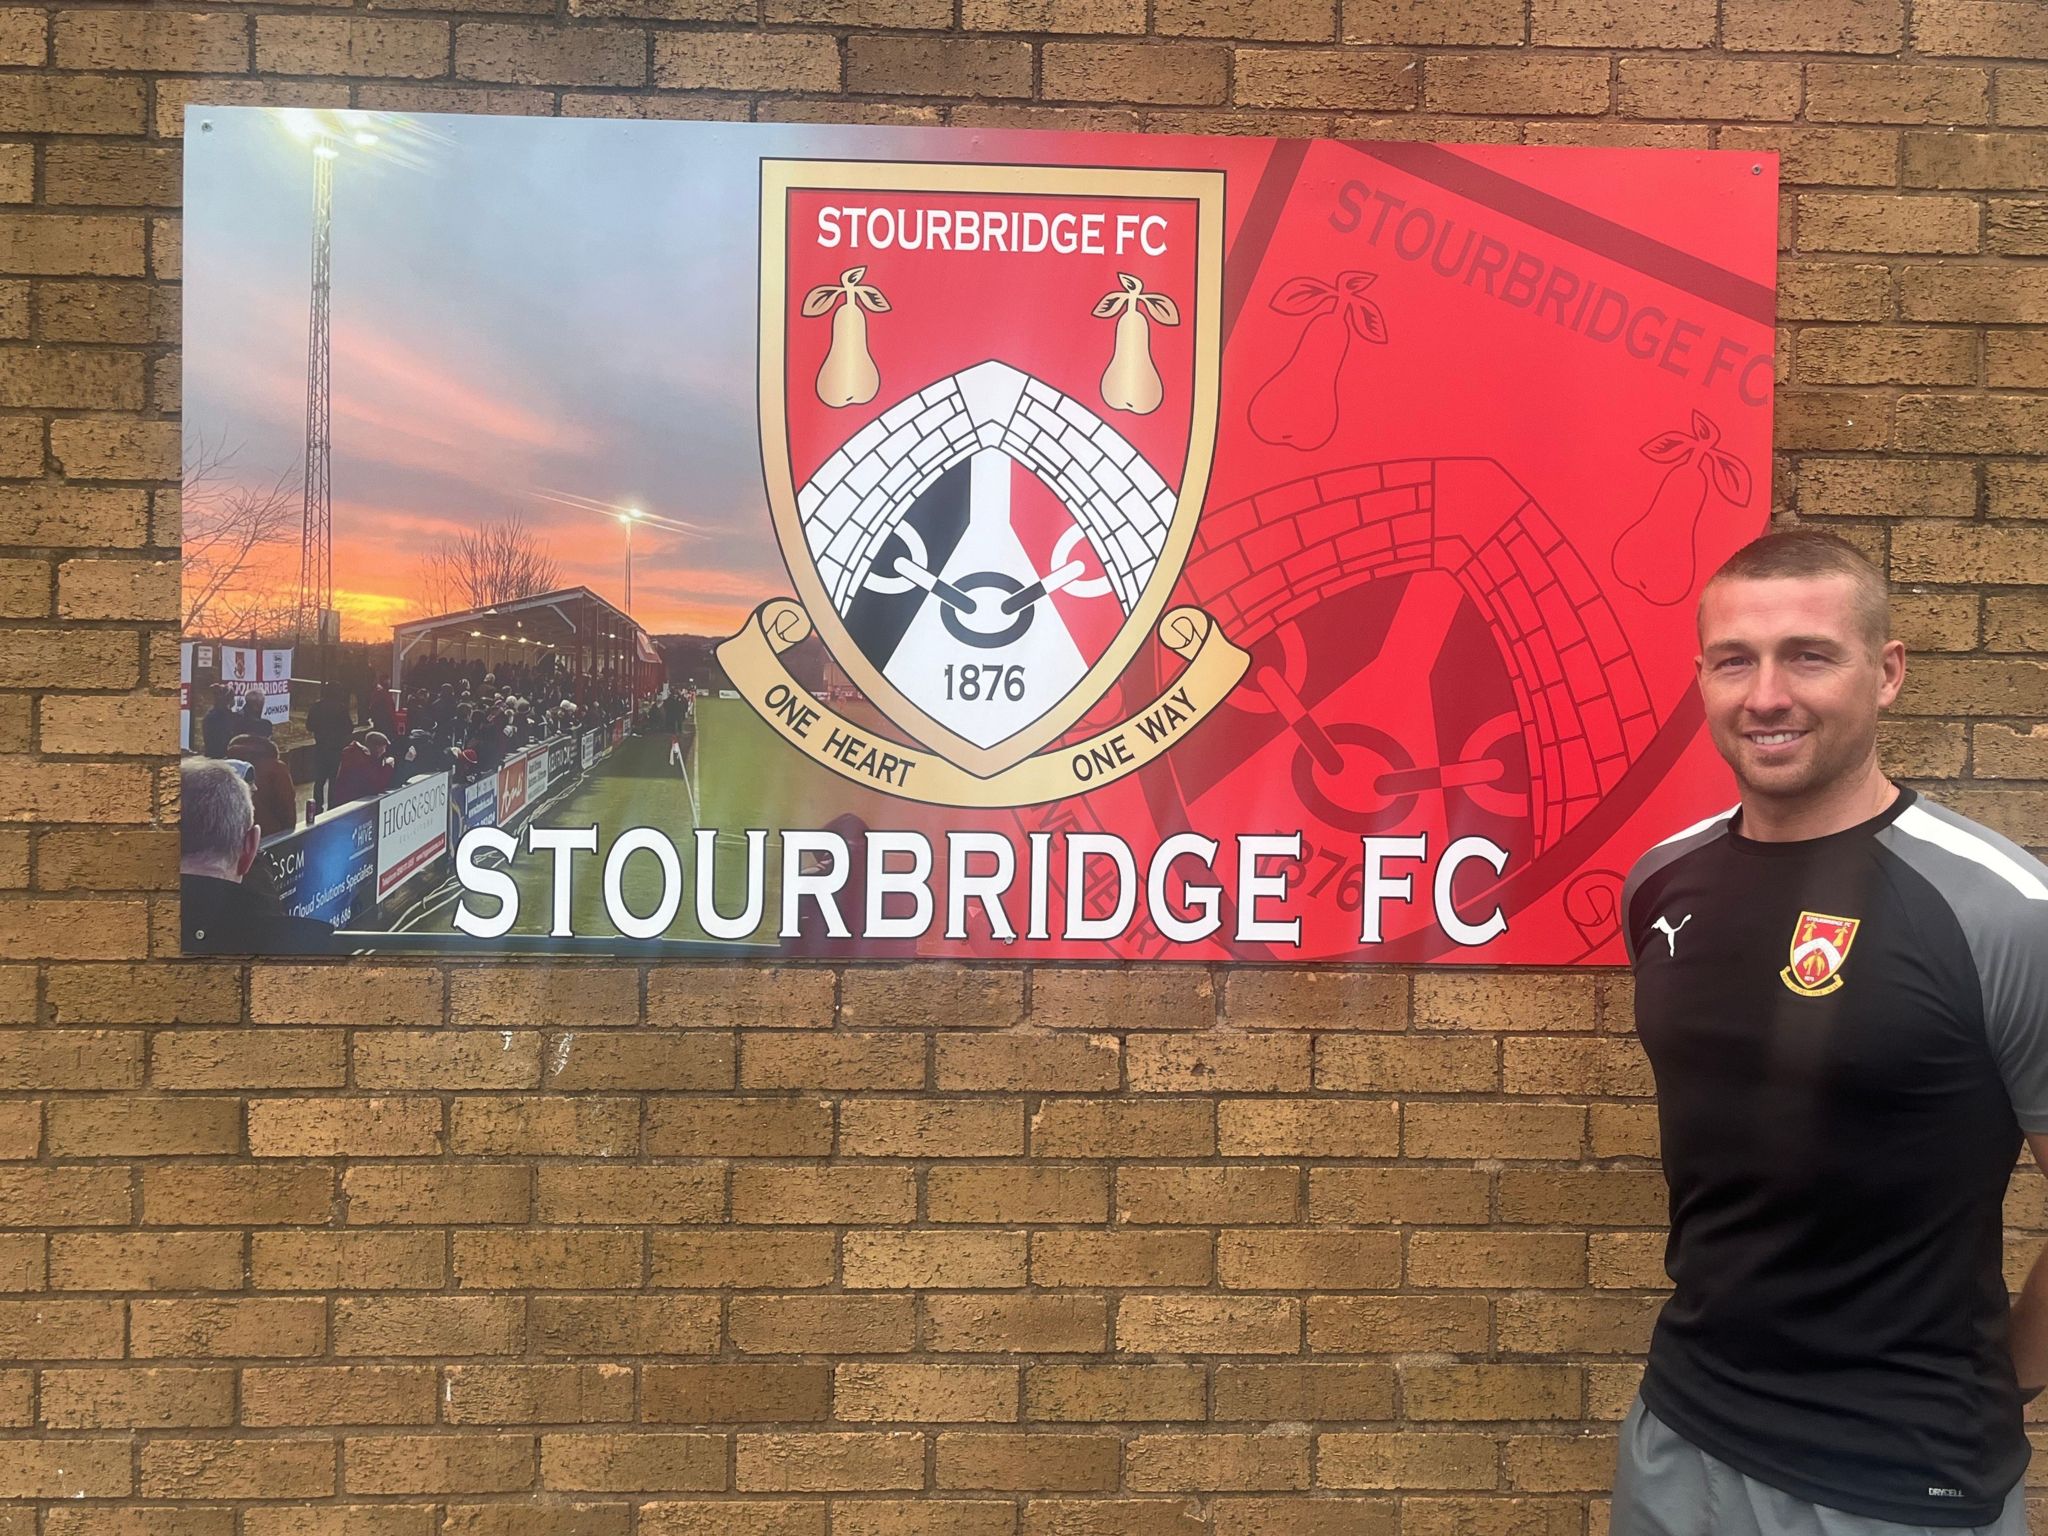 Darryl Knights in front of Stourbridge FC sign